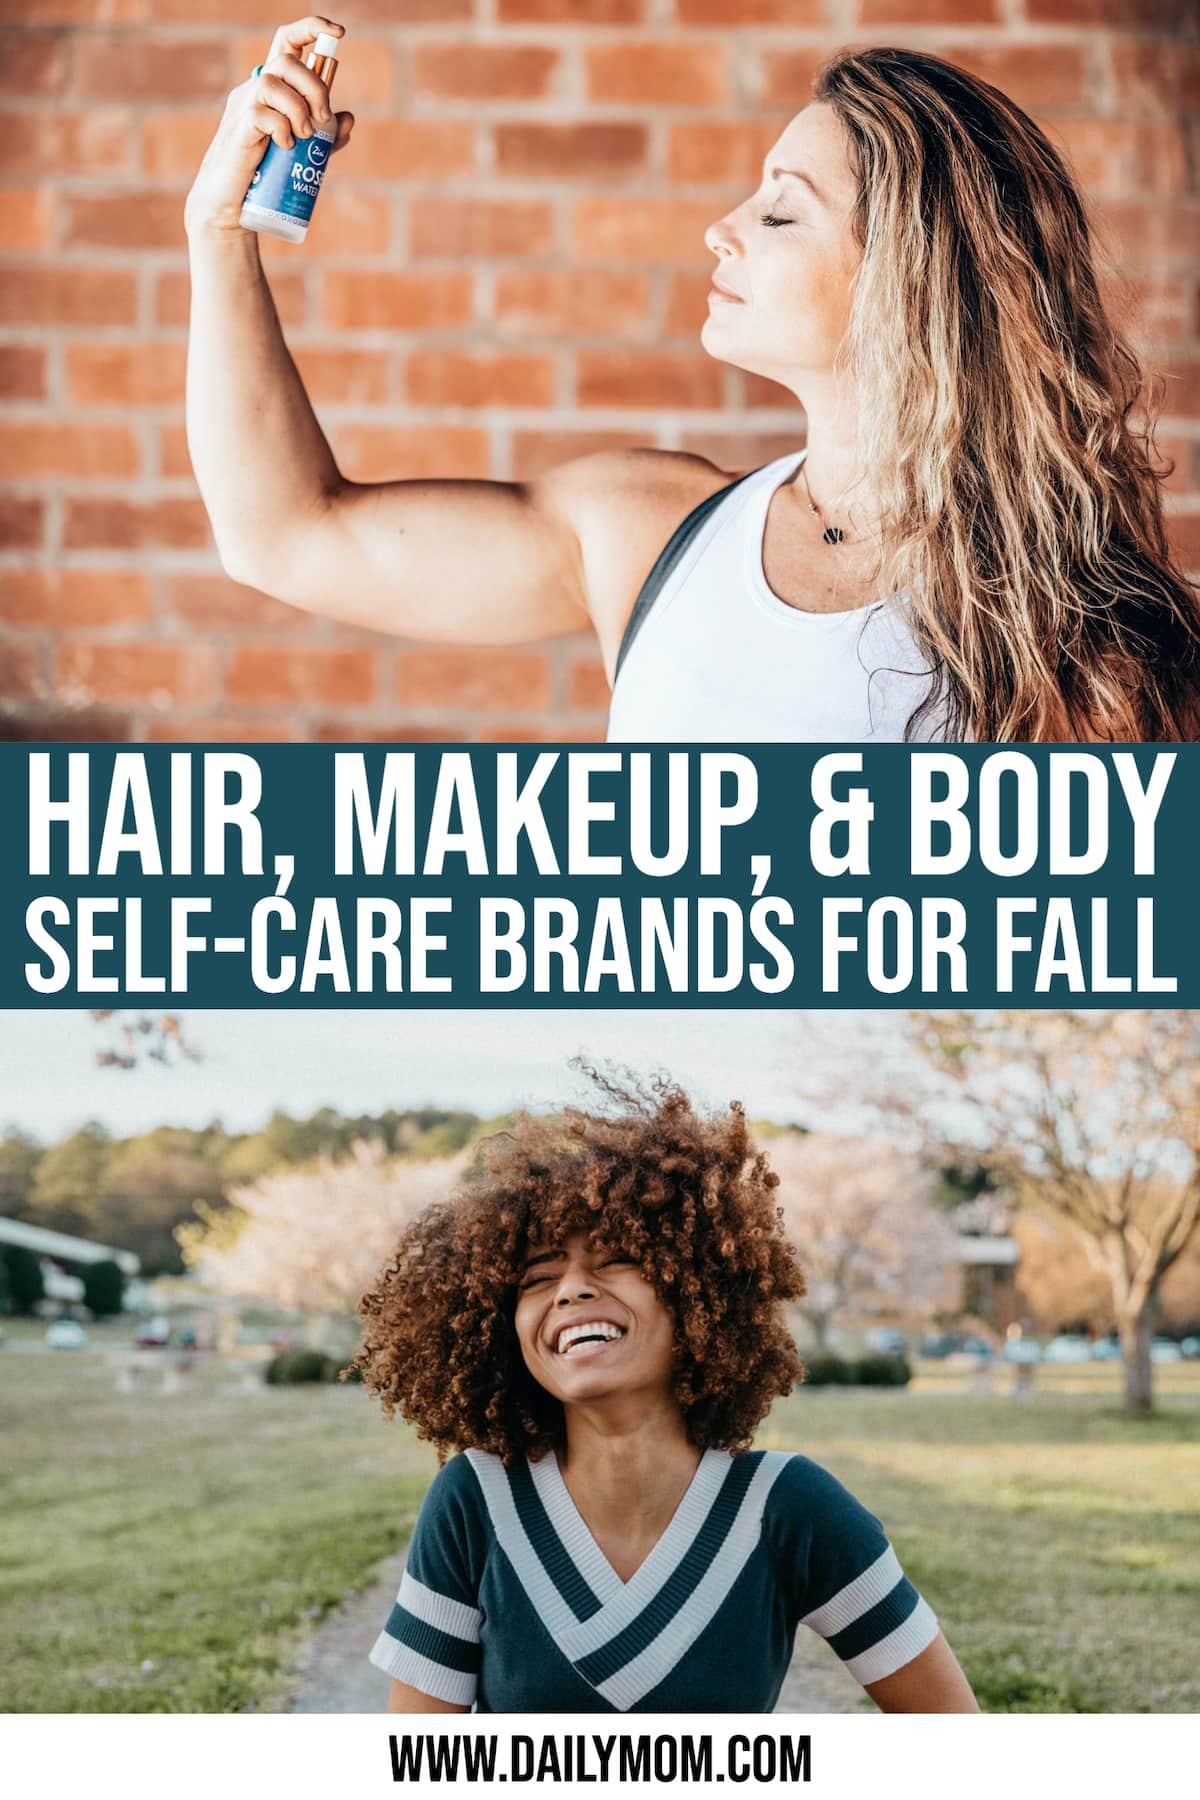 15 Die-Hard Brands You’Ll Want For Fall Hair Trends, Makeup, & Body Care